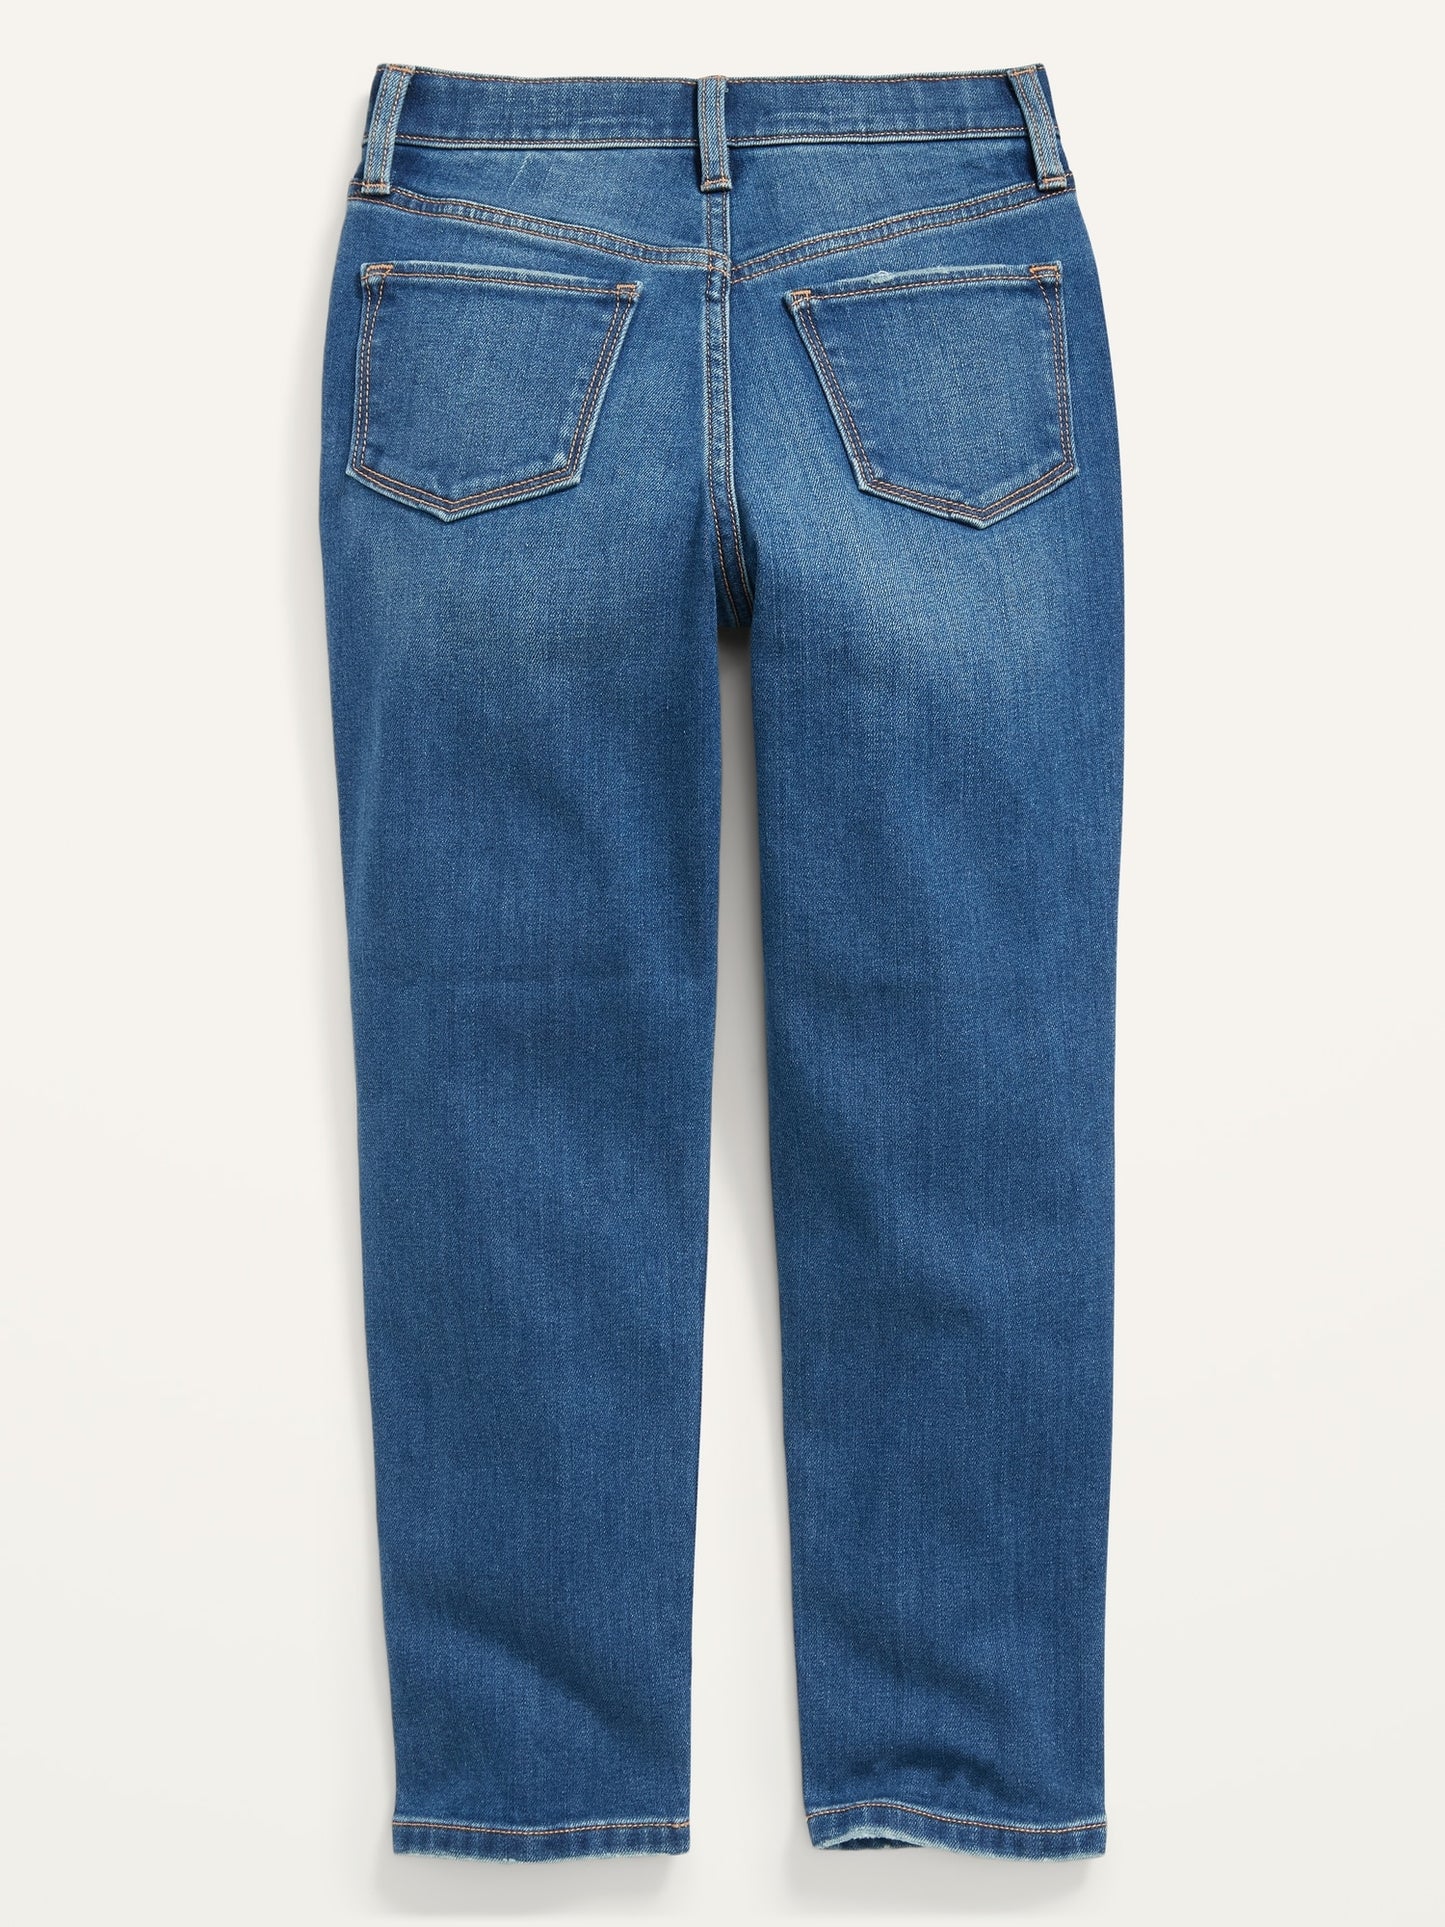 ON High-Waisted O.G. Straight Built-In Warm Jeans For Girls - Bonita Blue